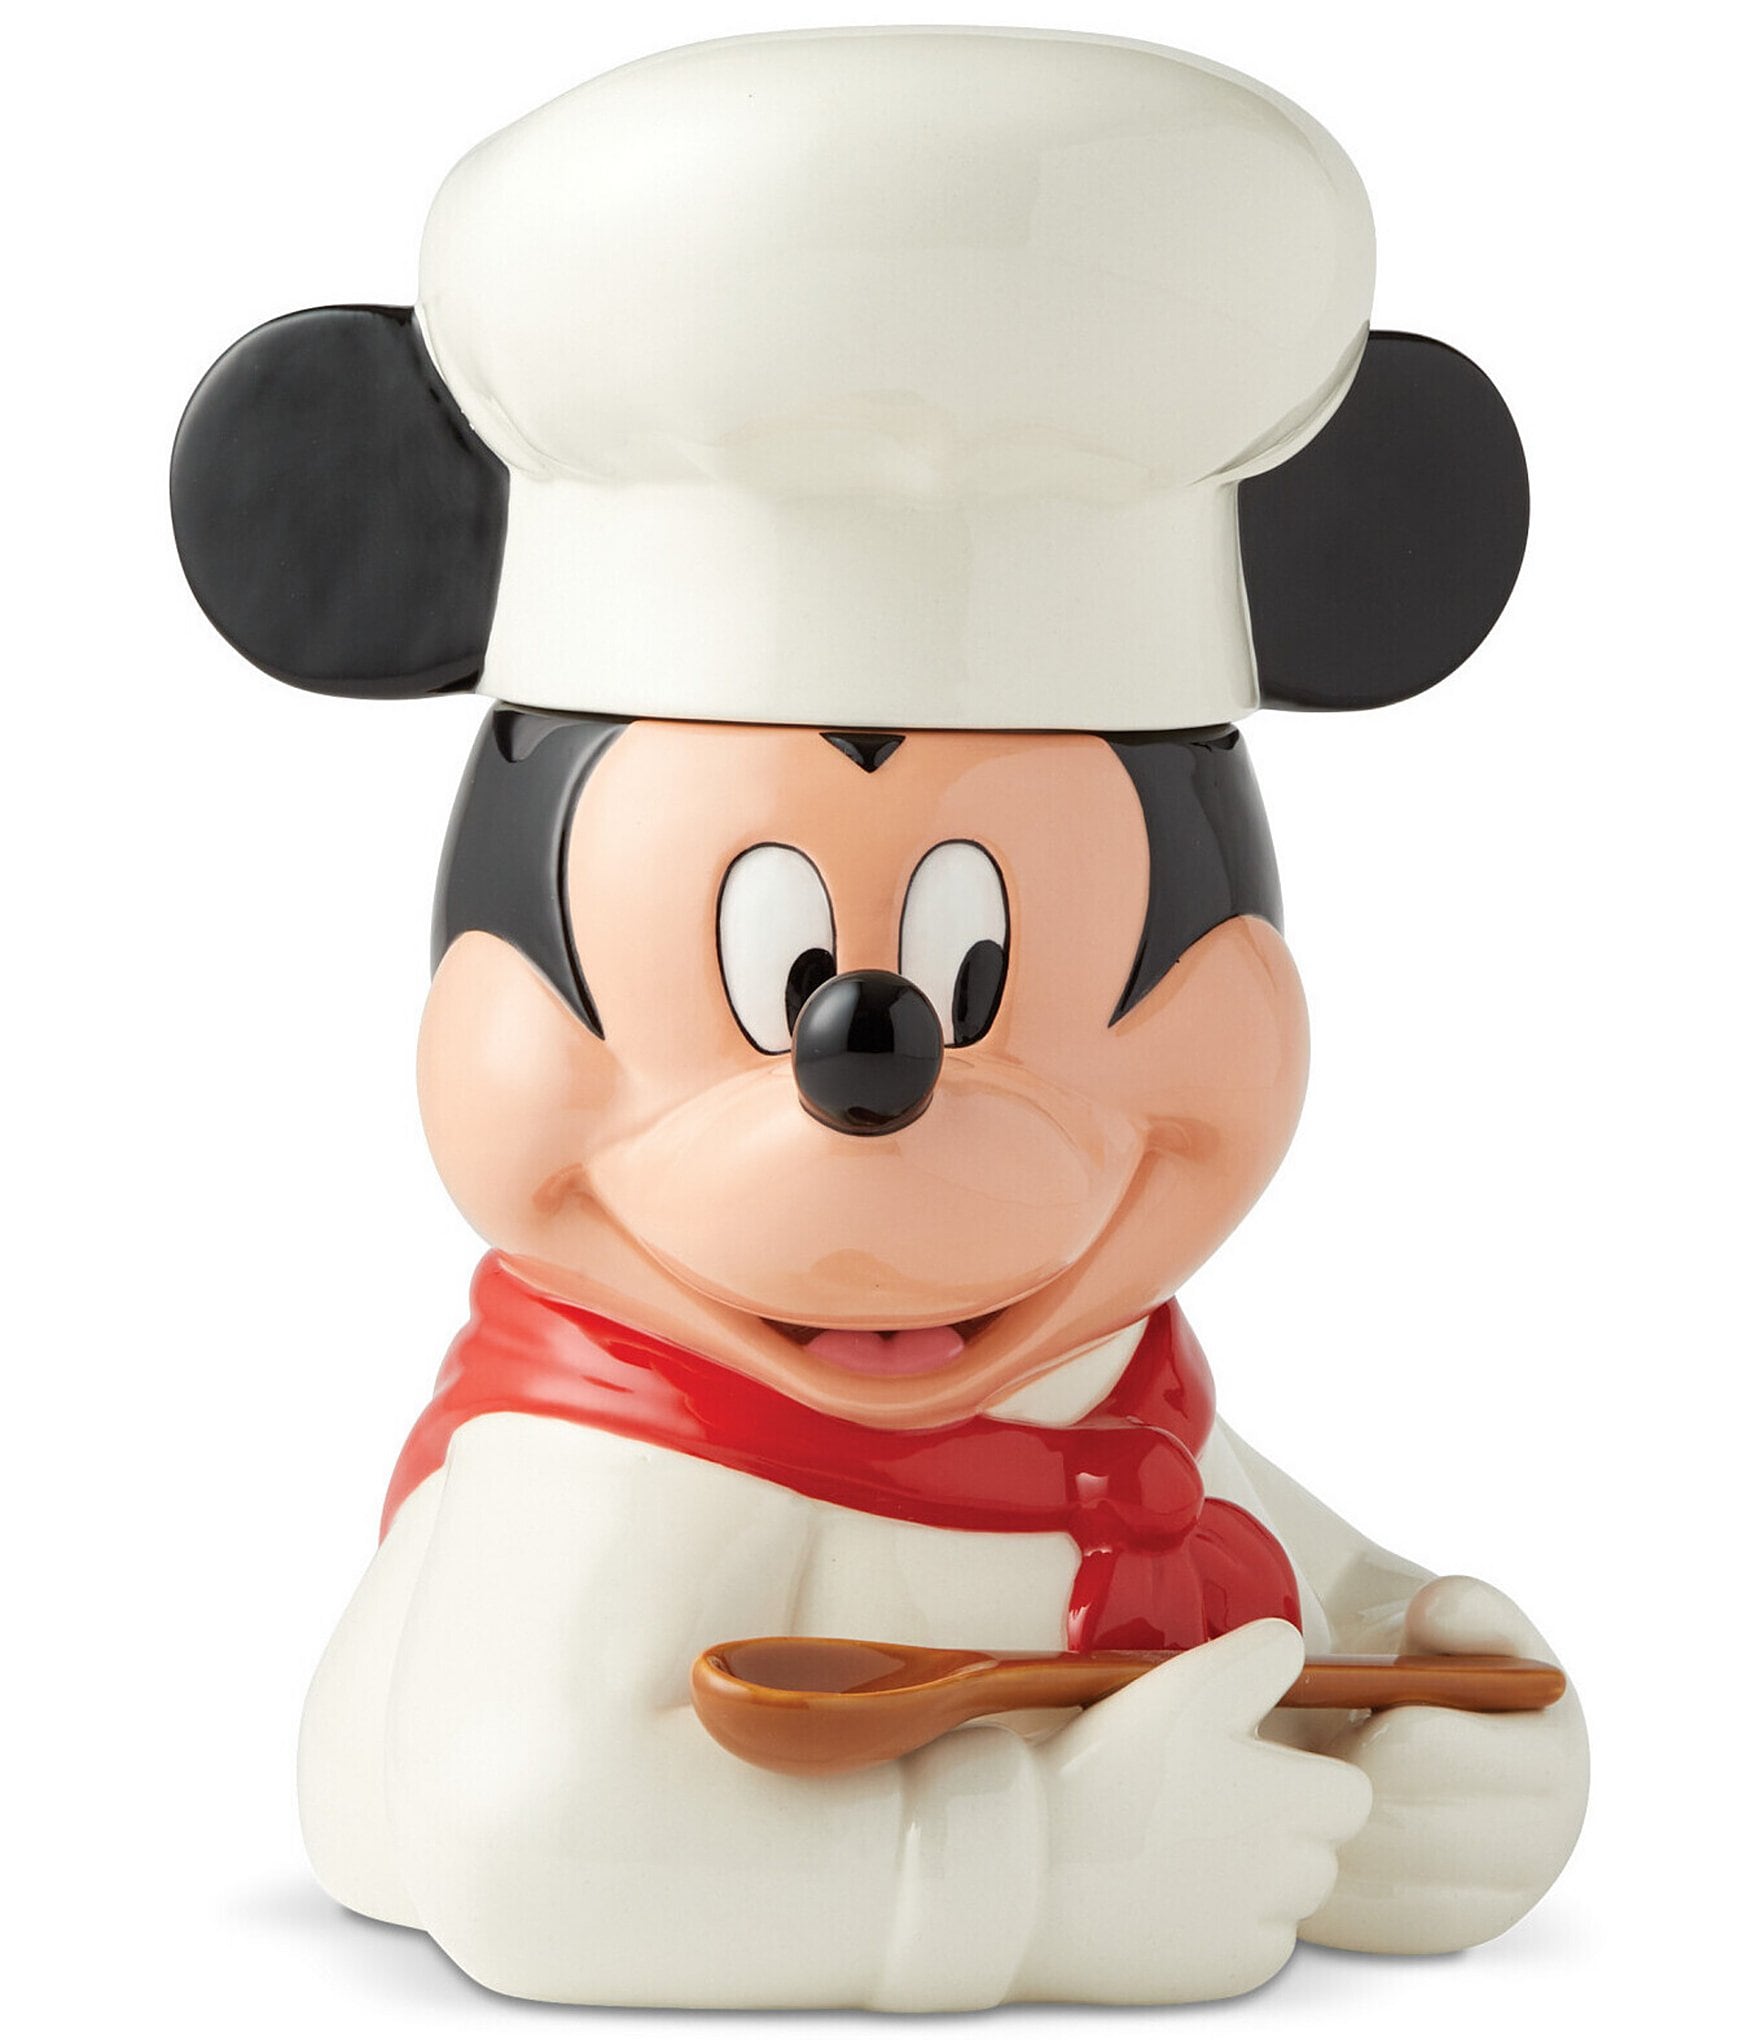 https://dimg.dillards.com/is/image/DillardsZoom/zoom/department-56-disney-ceramic-collection-chef-mickey-mouse-cookie-jar/00000000_zi_20375868.jpg